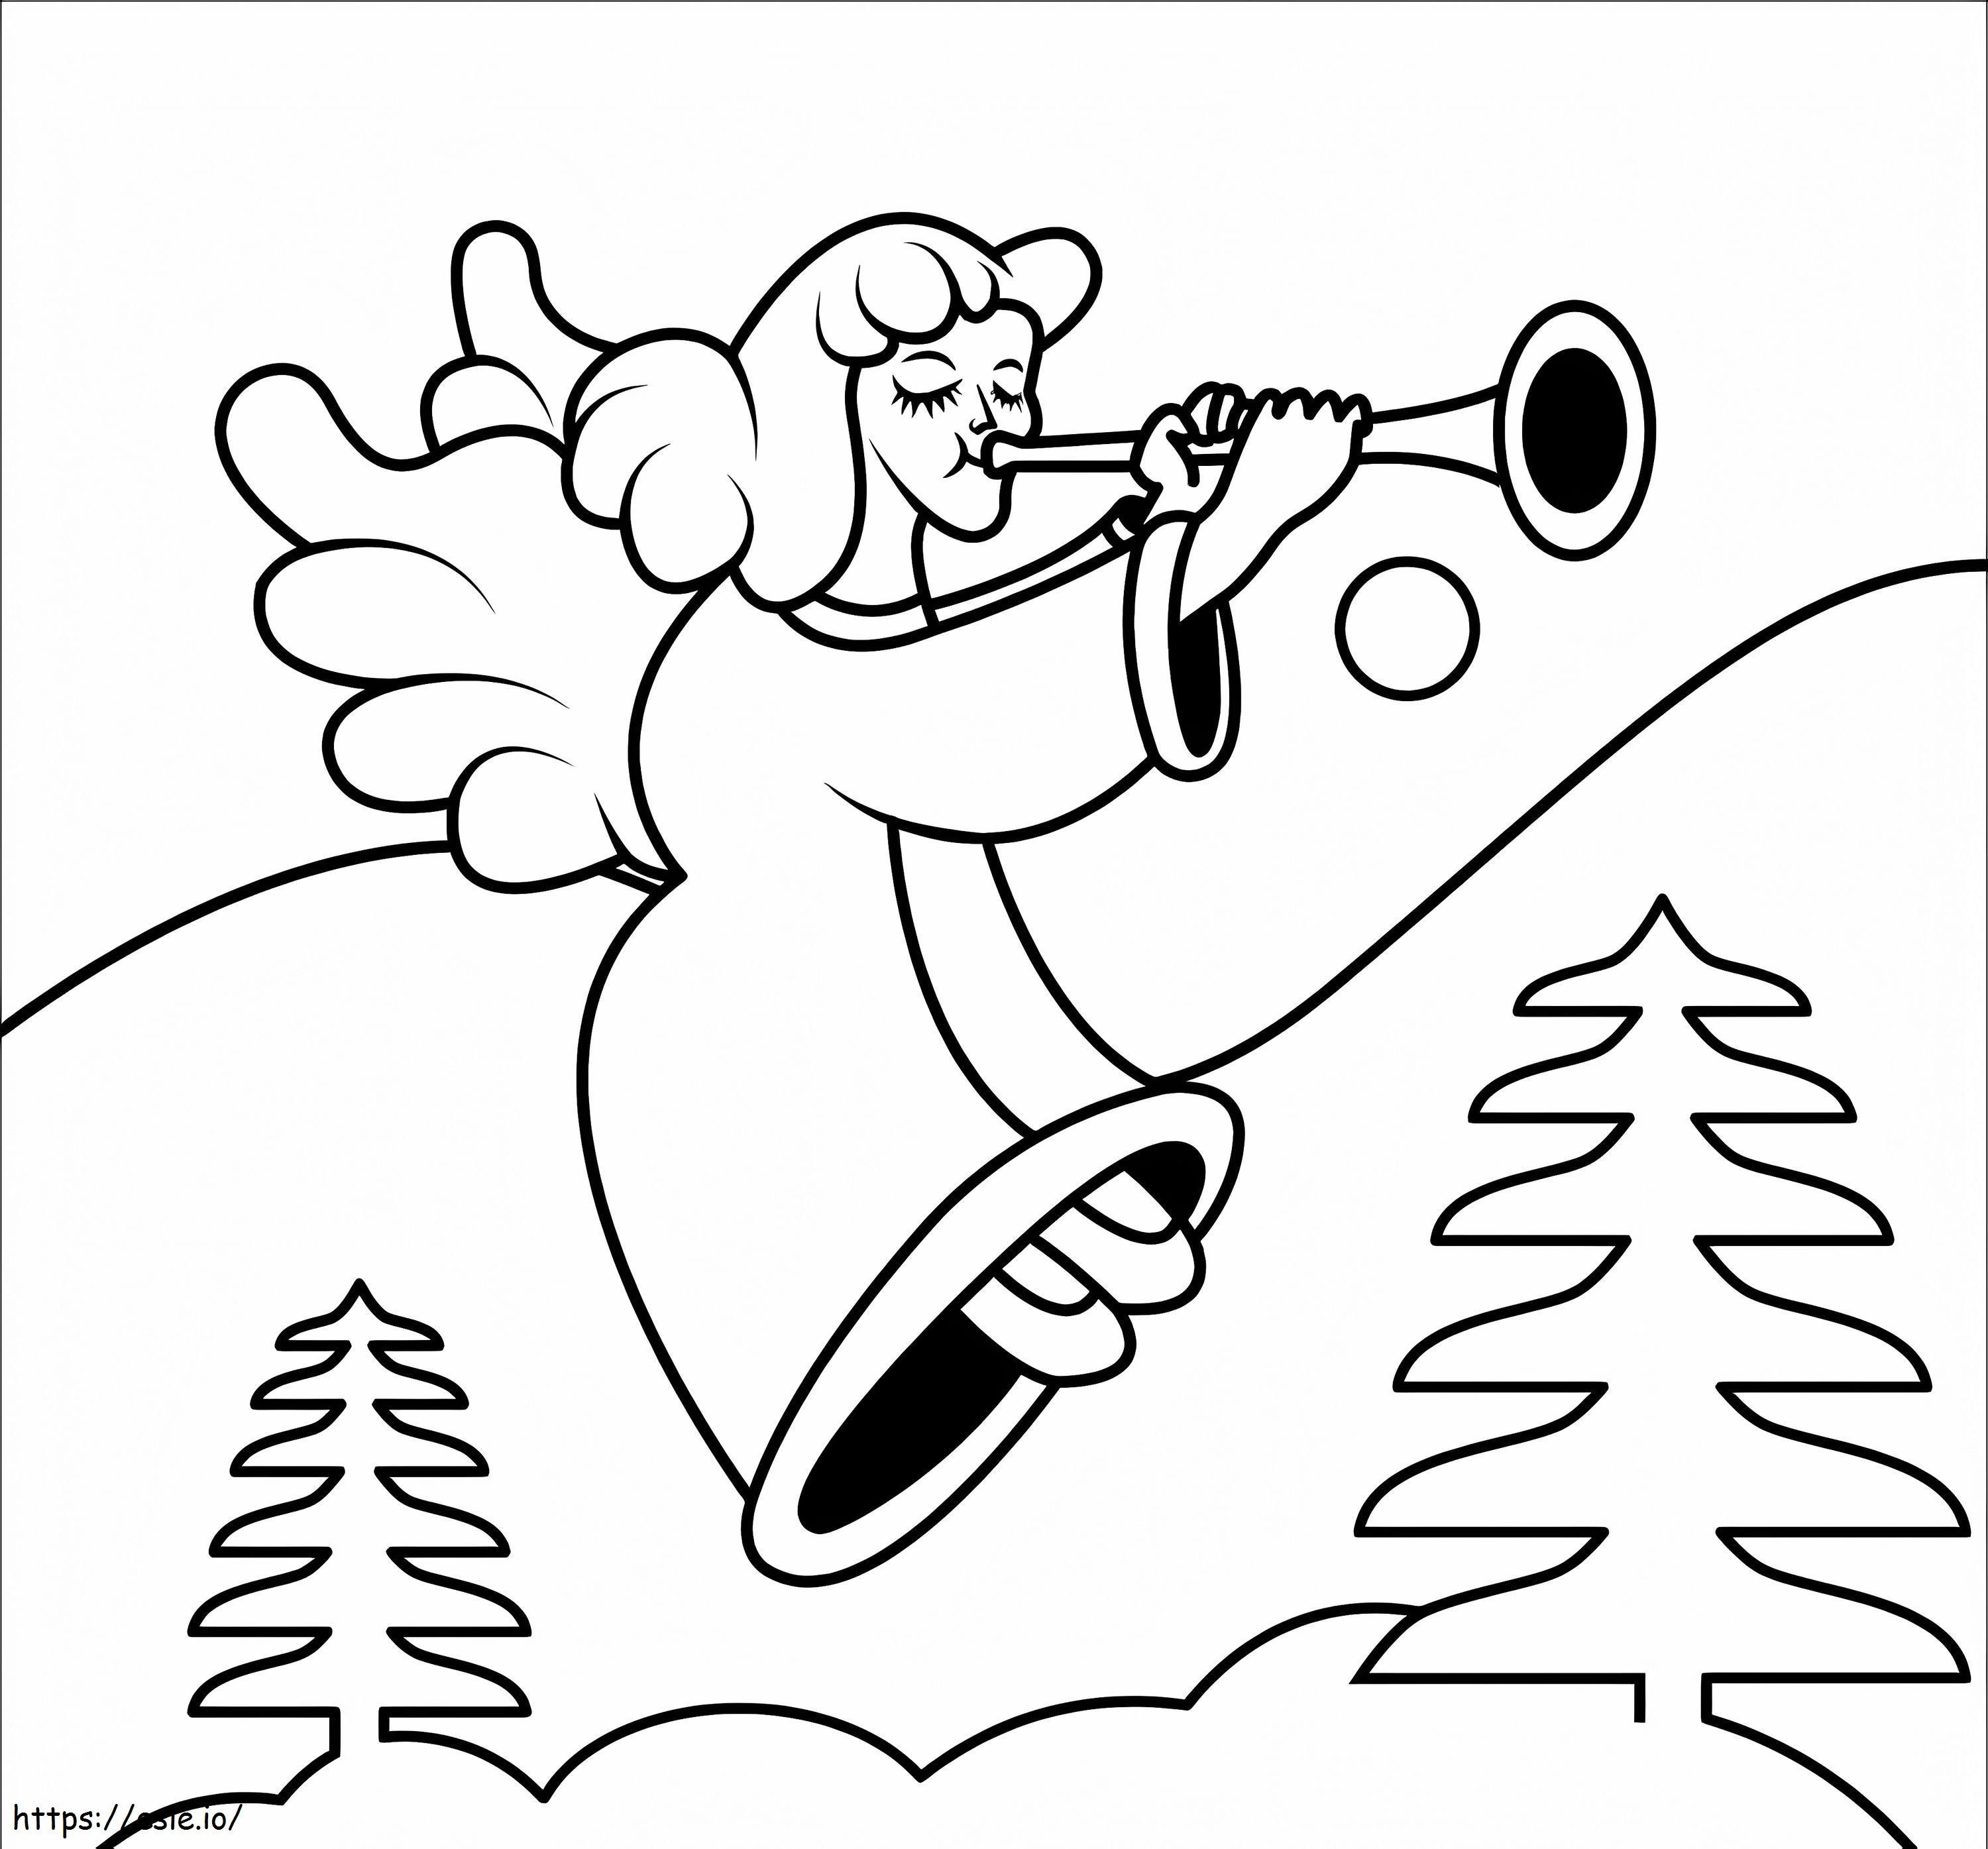 Musician Christmas Angel coloring page